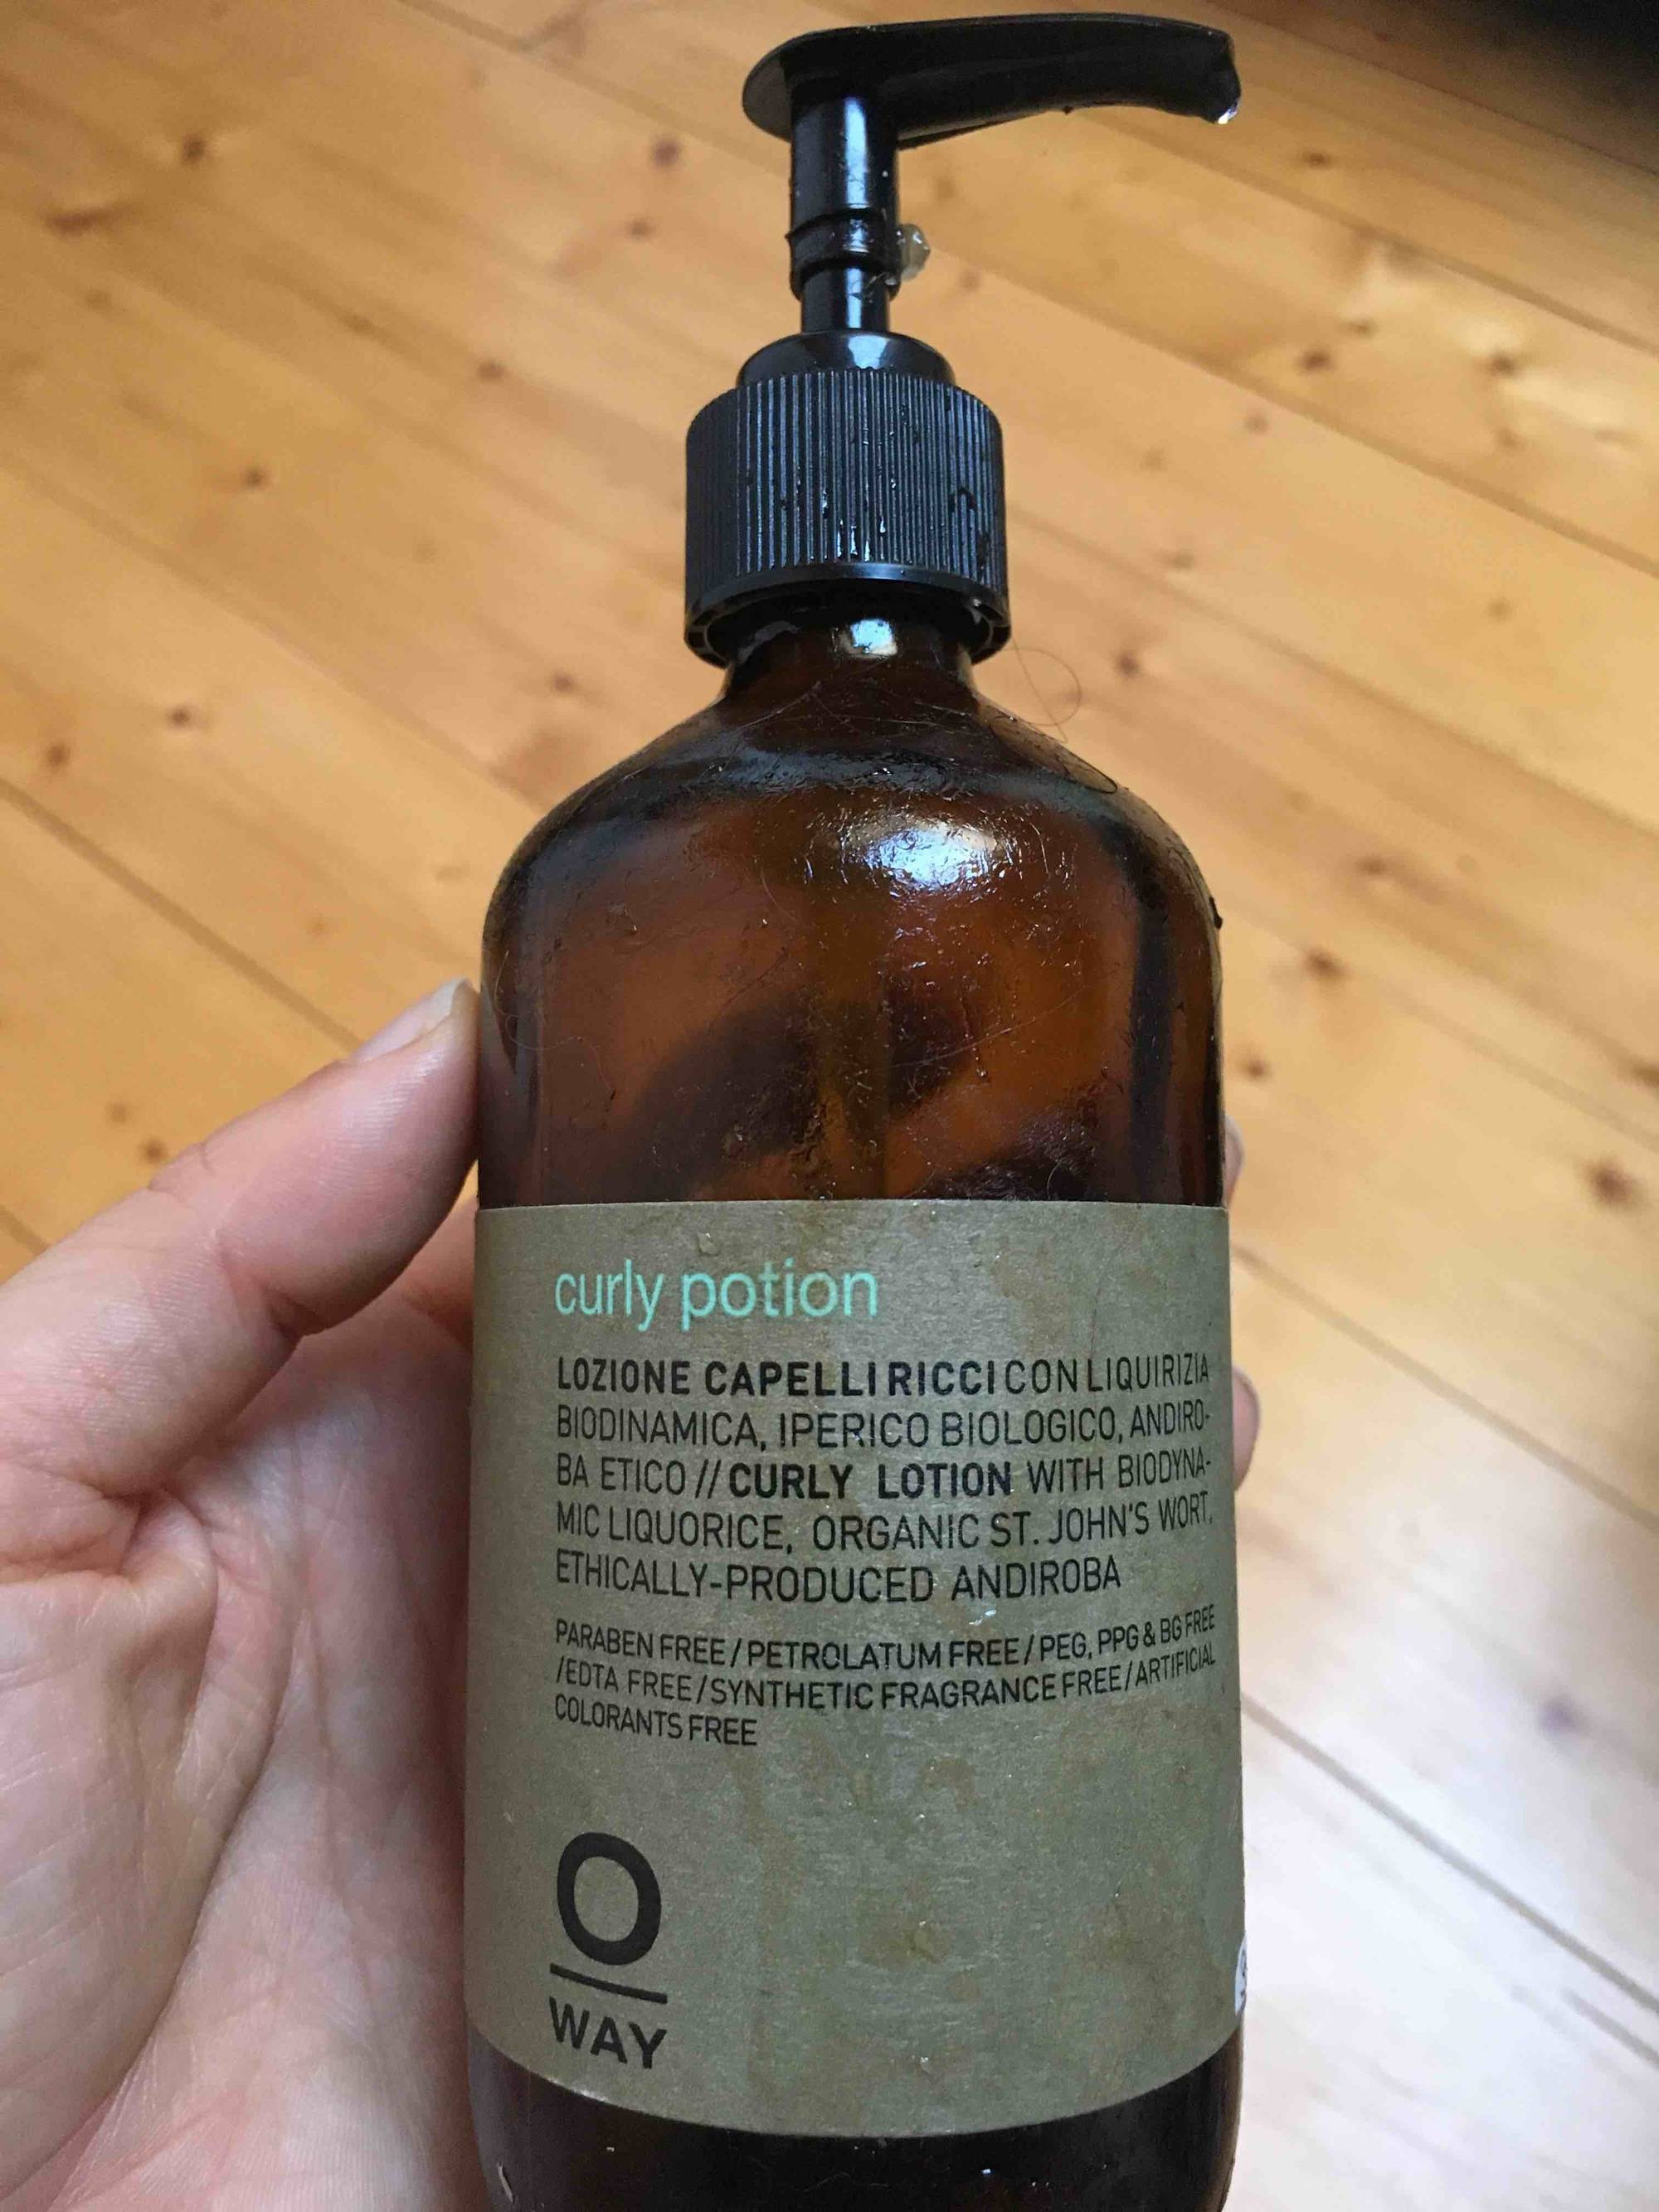 OWAY - Curly potion